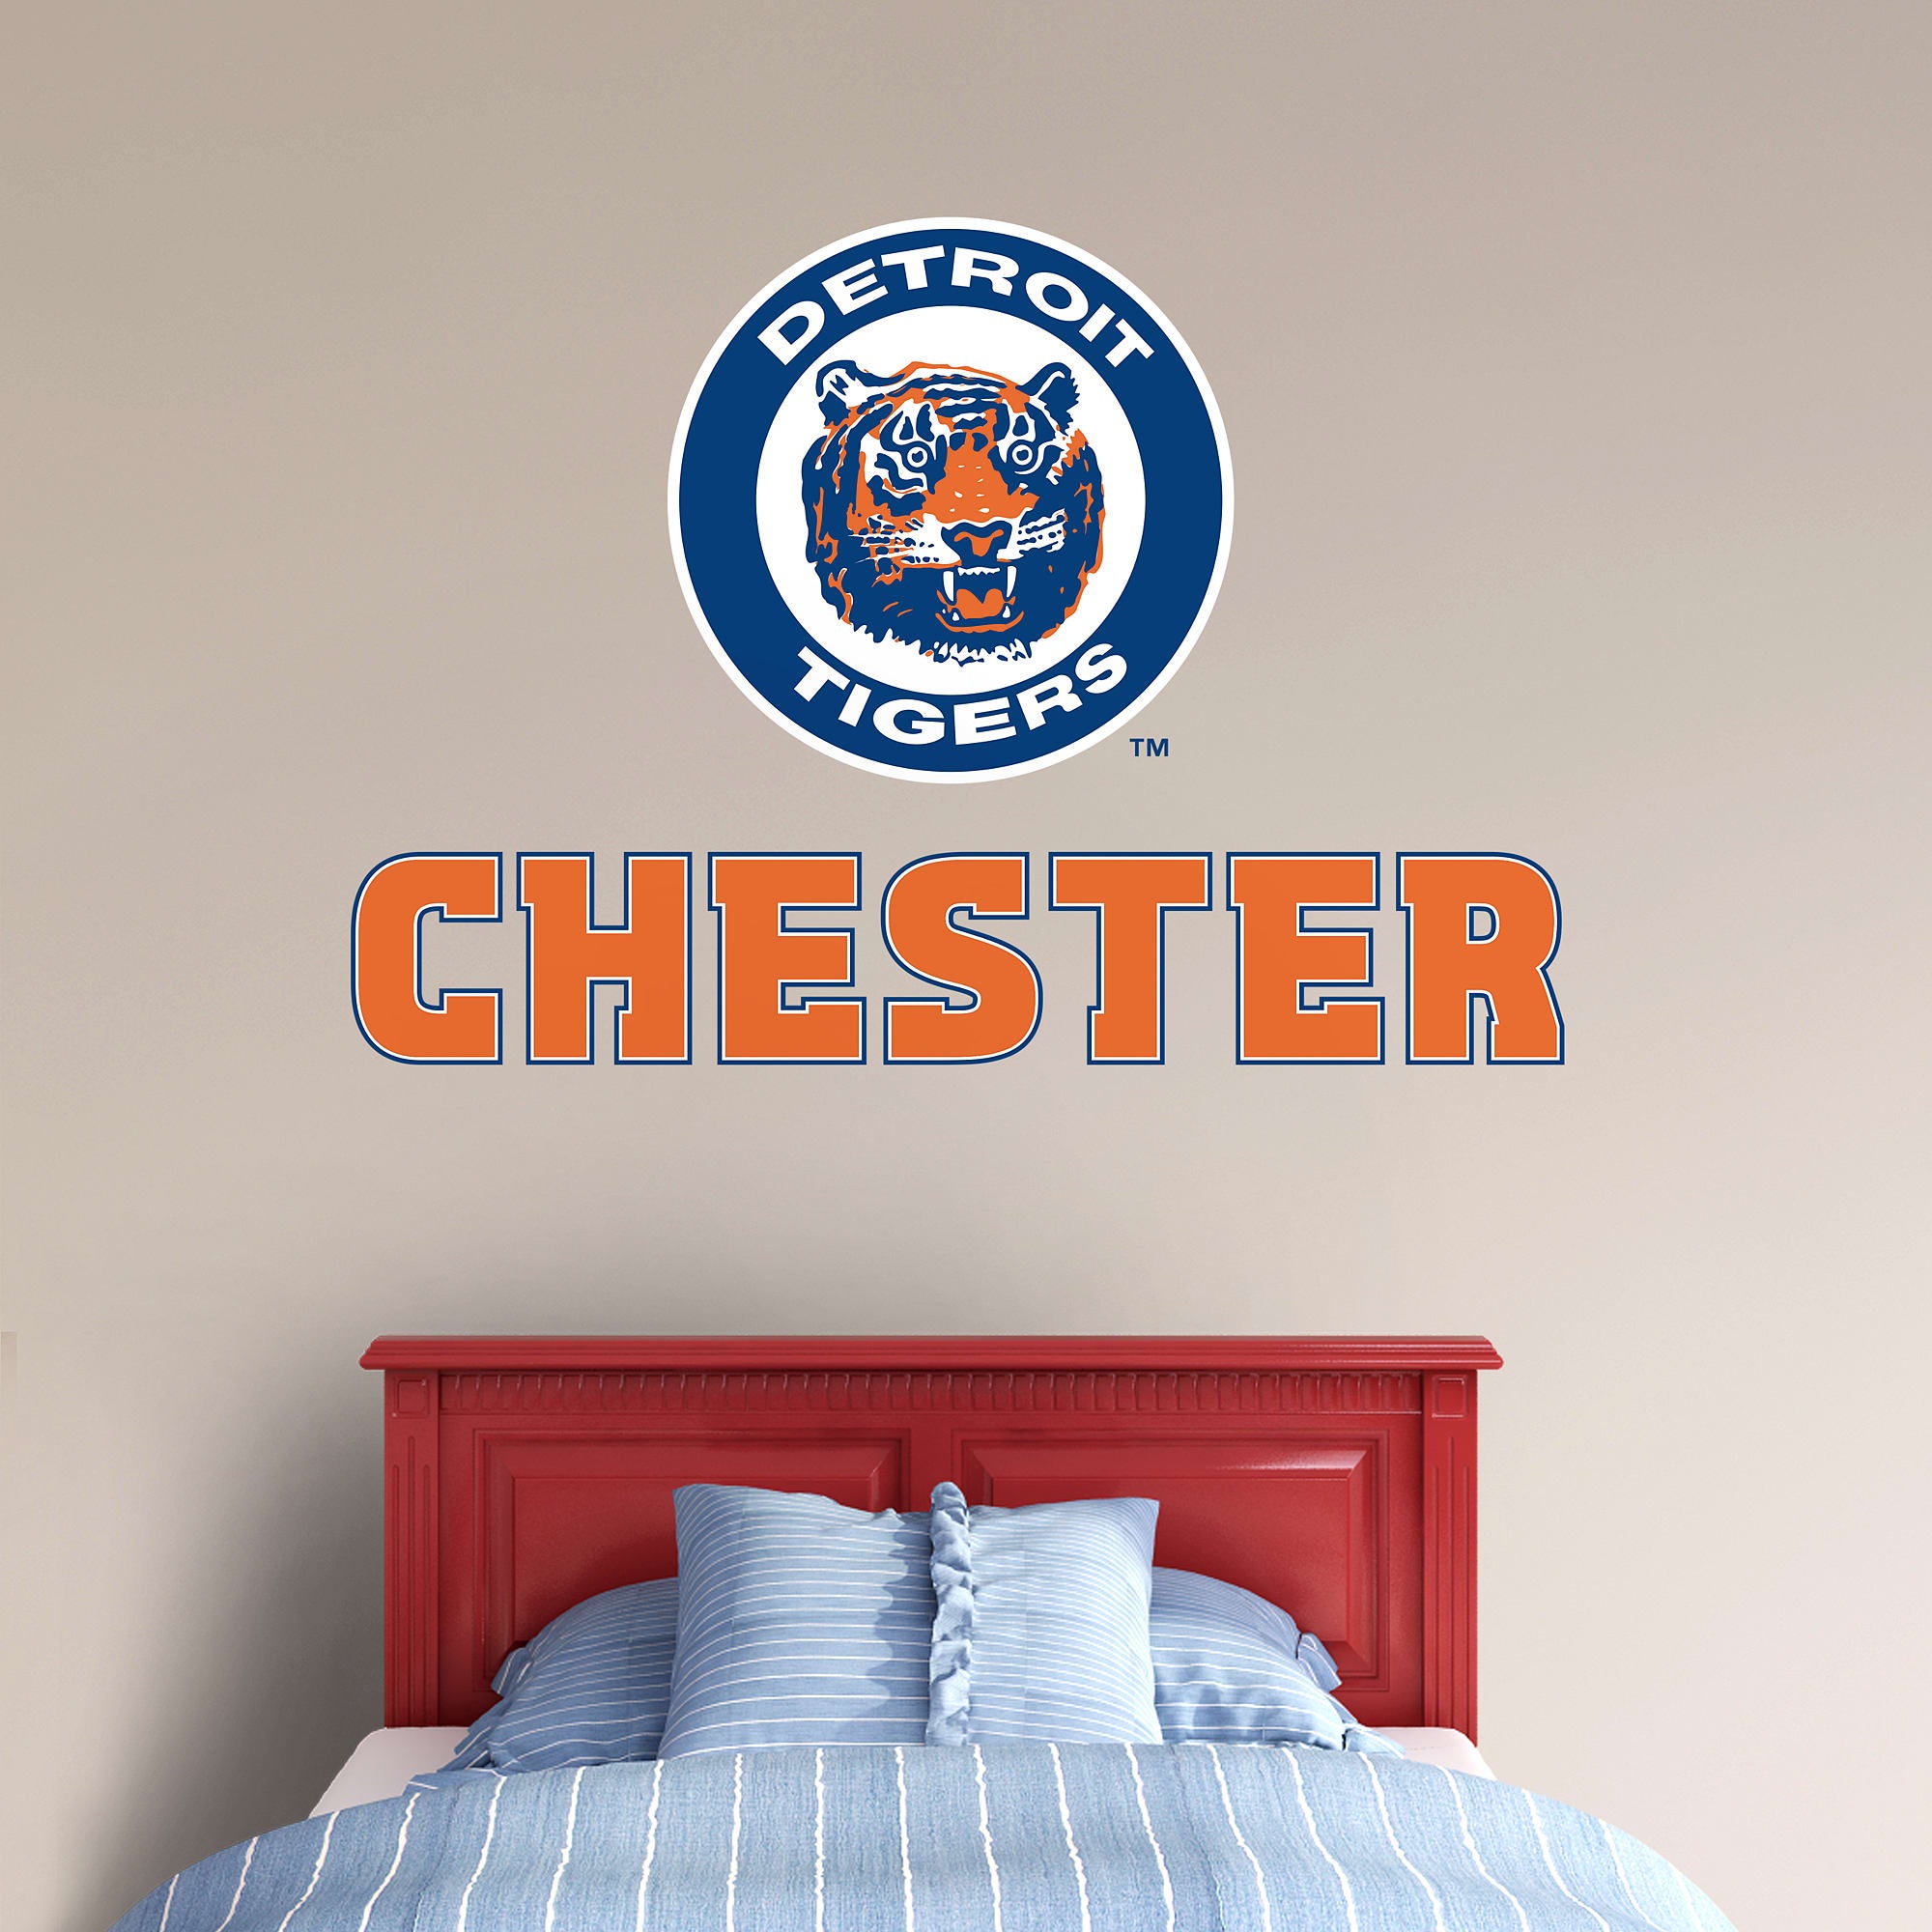 Detroit Tigers: Classic Stacked Personalized Name - Officially Licensed MLB Transfer Decal in Orange (52"W x 39.5"H) by Fathead